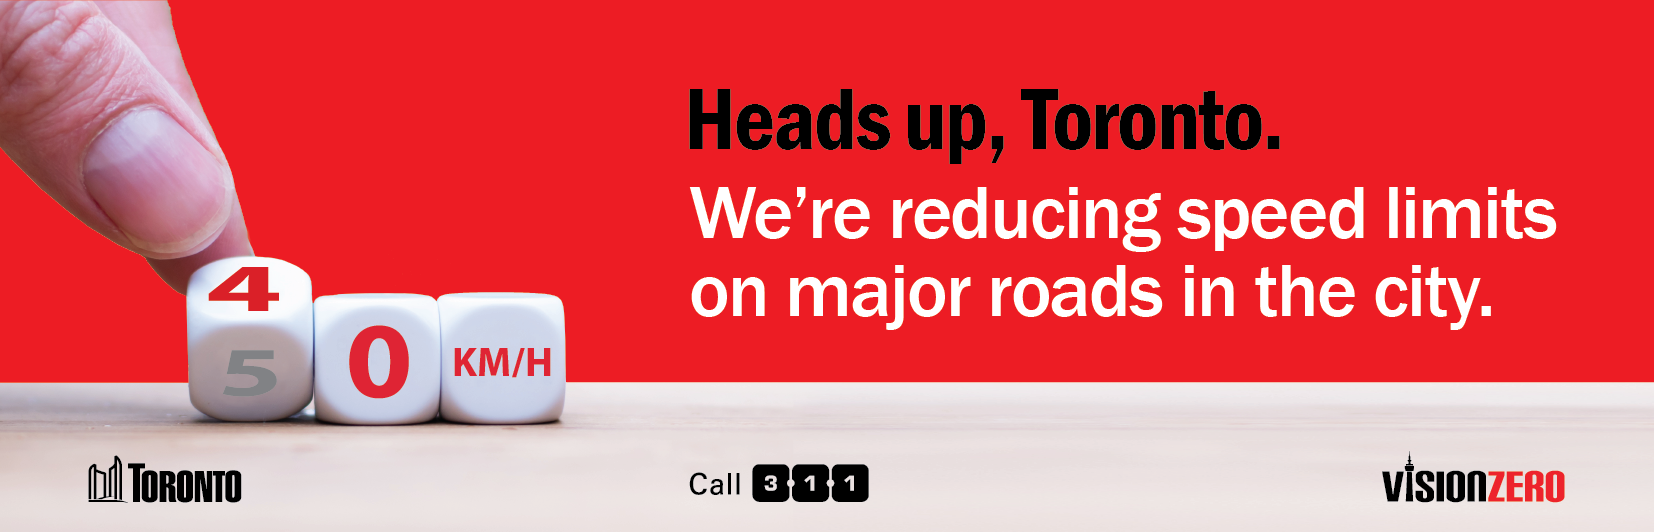 Heads up, Toronto. We're reducing speed limits on major roads in the city. 